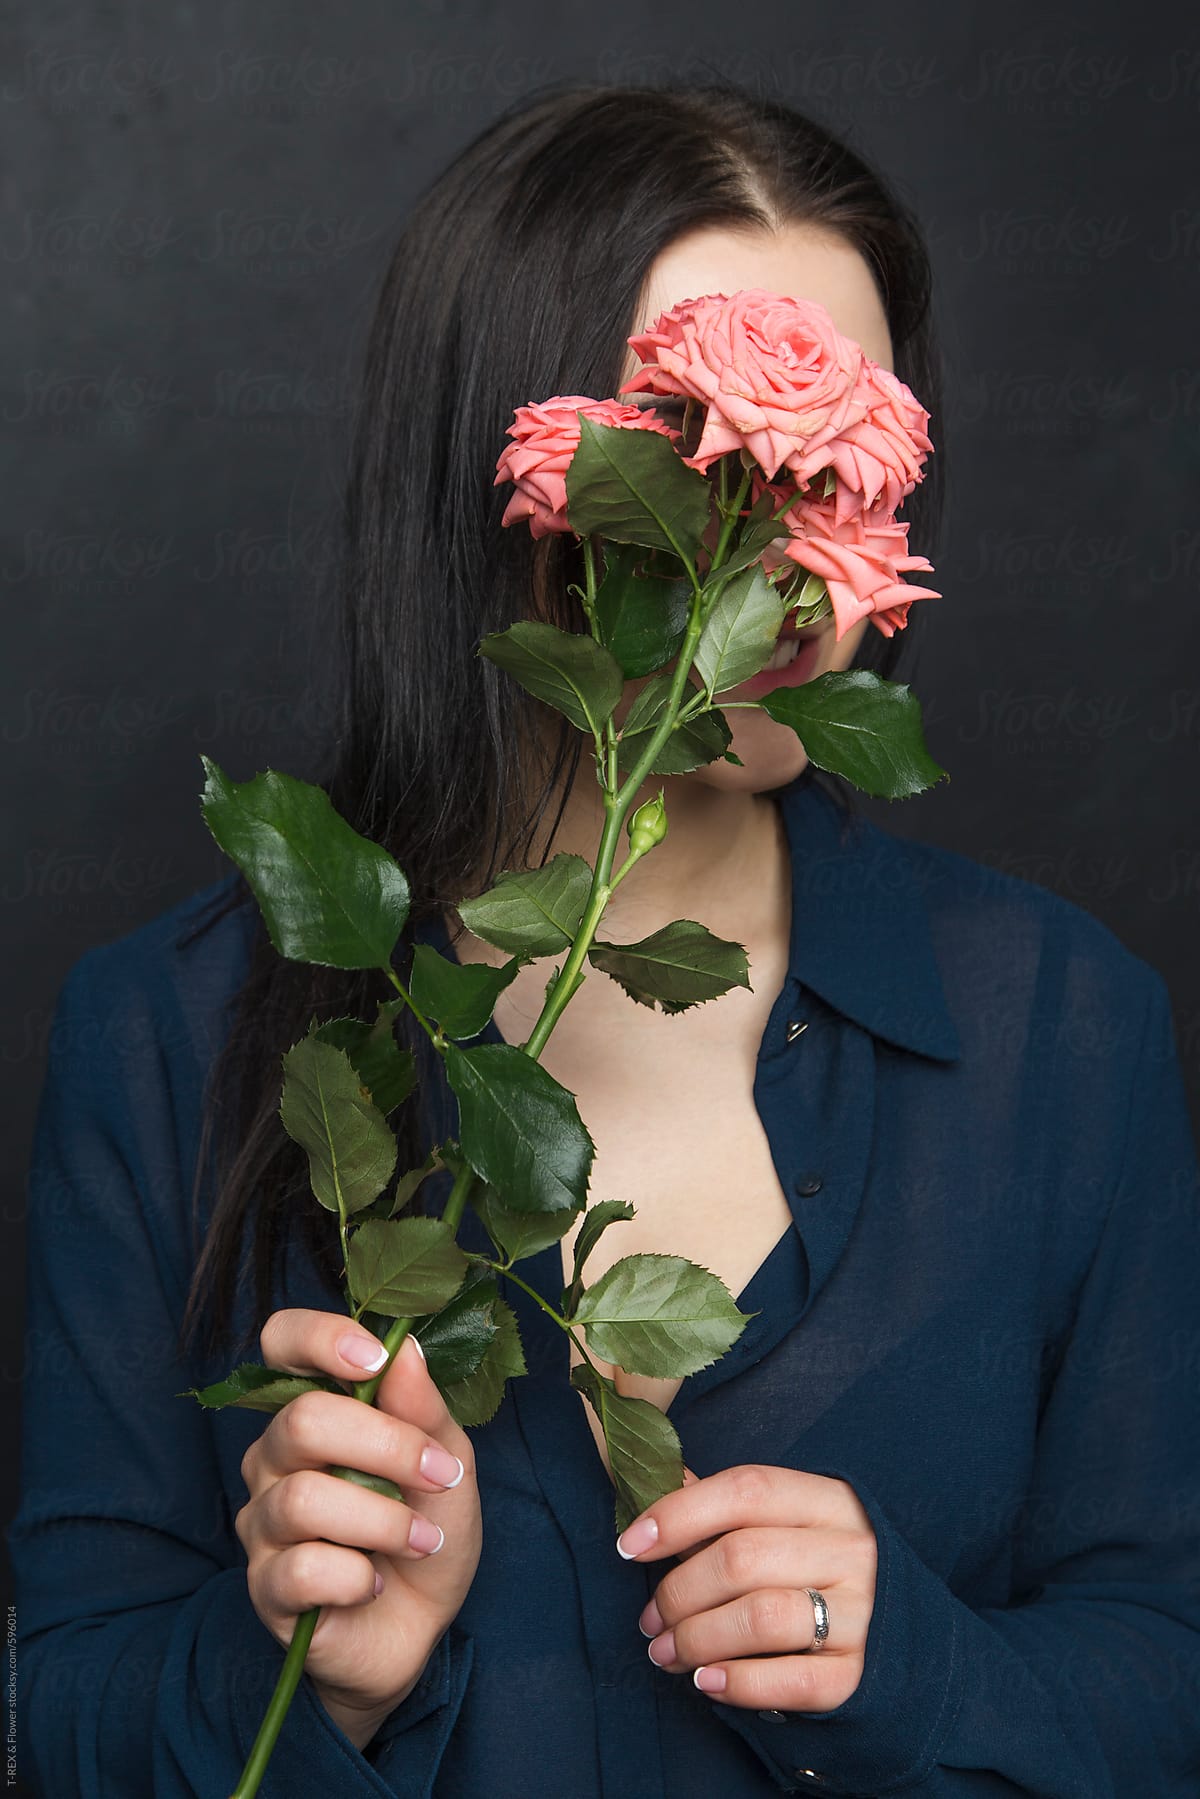 Woman Covering Face With Roses By Stocksy Contributor Danil Nevsky Stocksy 